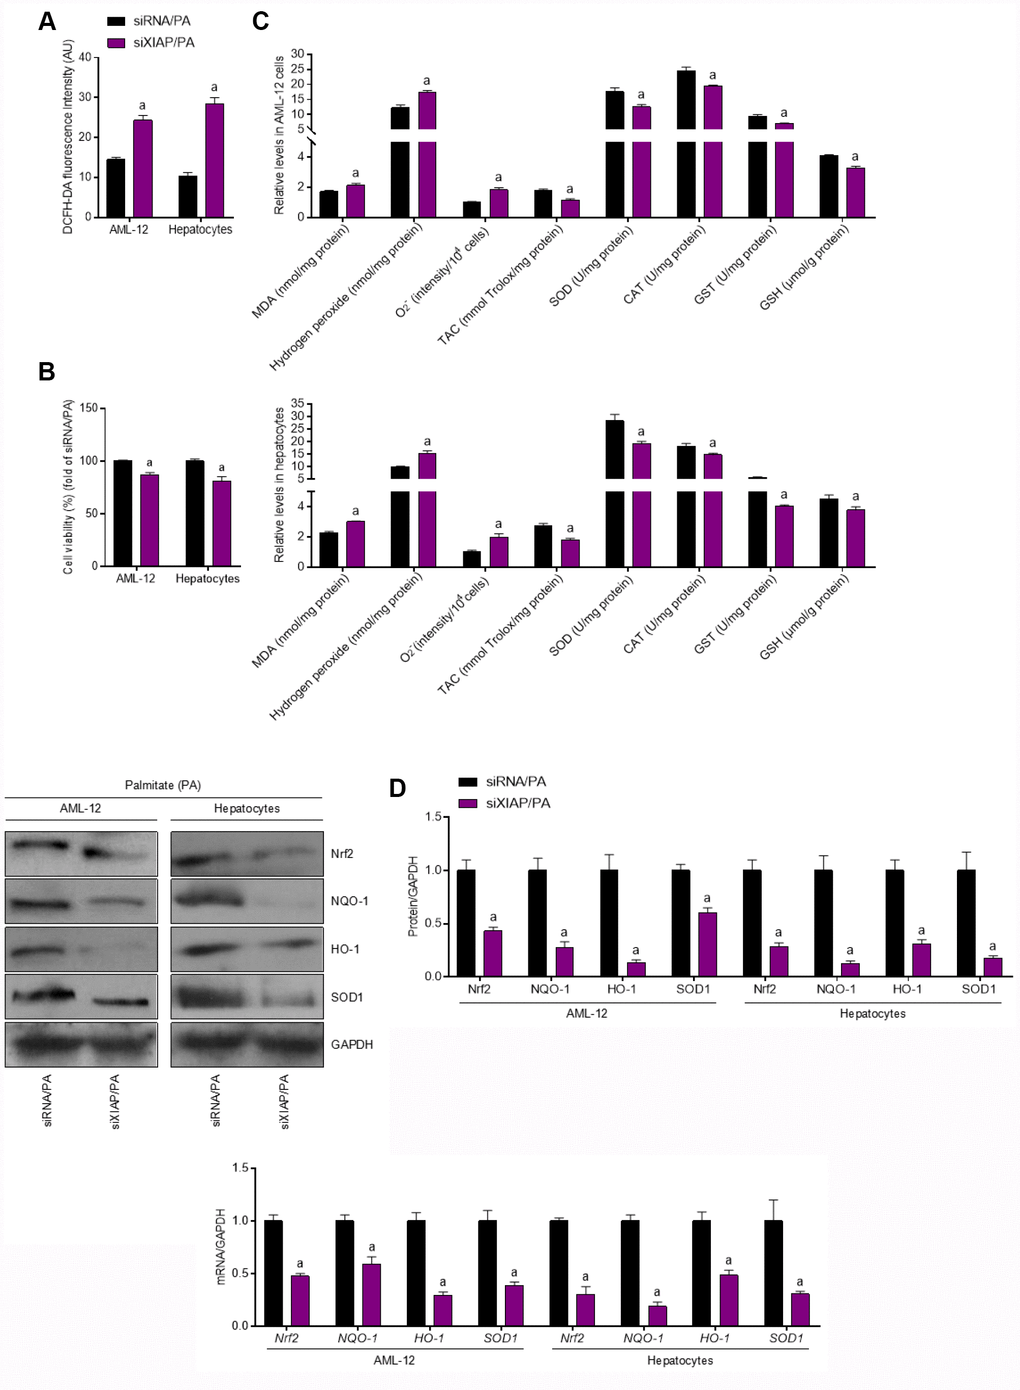 Functional loss of XIAP contributes to PA-induced oxidative stress in vitro. AML-12 and primary hepatocytes were transfected with XIAP siRNA for 24 h, followed by PA (250 μM) treatment for additional 24 h. Subsequently, further studies were carried out. (A and B) Determination of cellular ROS production and cell viability. (C) Calculation of cellular MDA, H2O2, O2- levels, TAC, SOD, CAT, GST and GSH activities. (D) Western blot and qPCR analysis showed the alteration of SOD1, NQO-1, HO-1 and Nrf-2 in cells treated as described. For all bar plots shown, data are expressed as the mean ± SEM. n = 8 per group. ap 